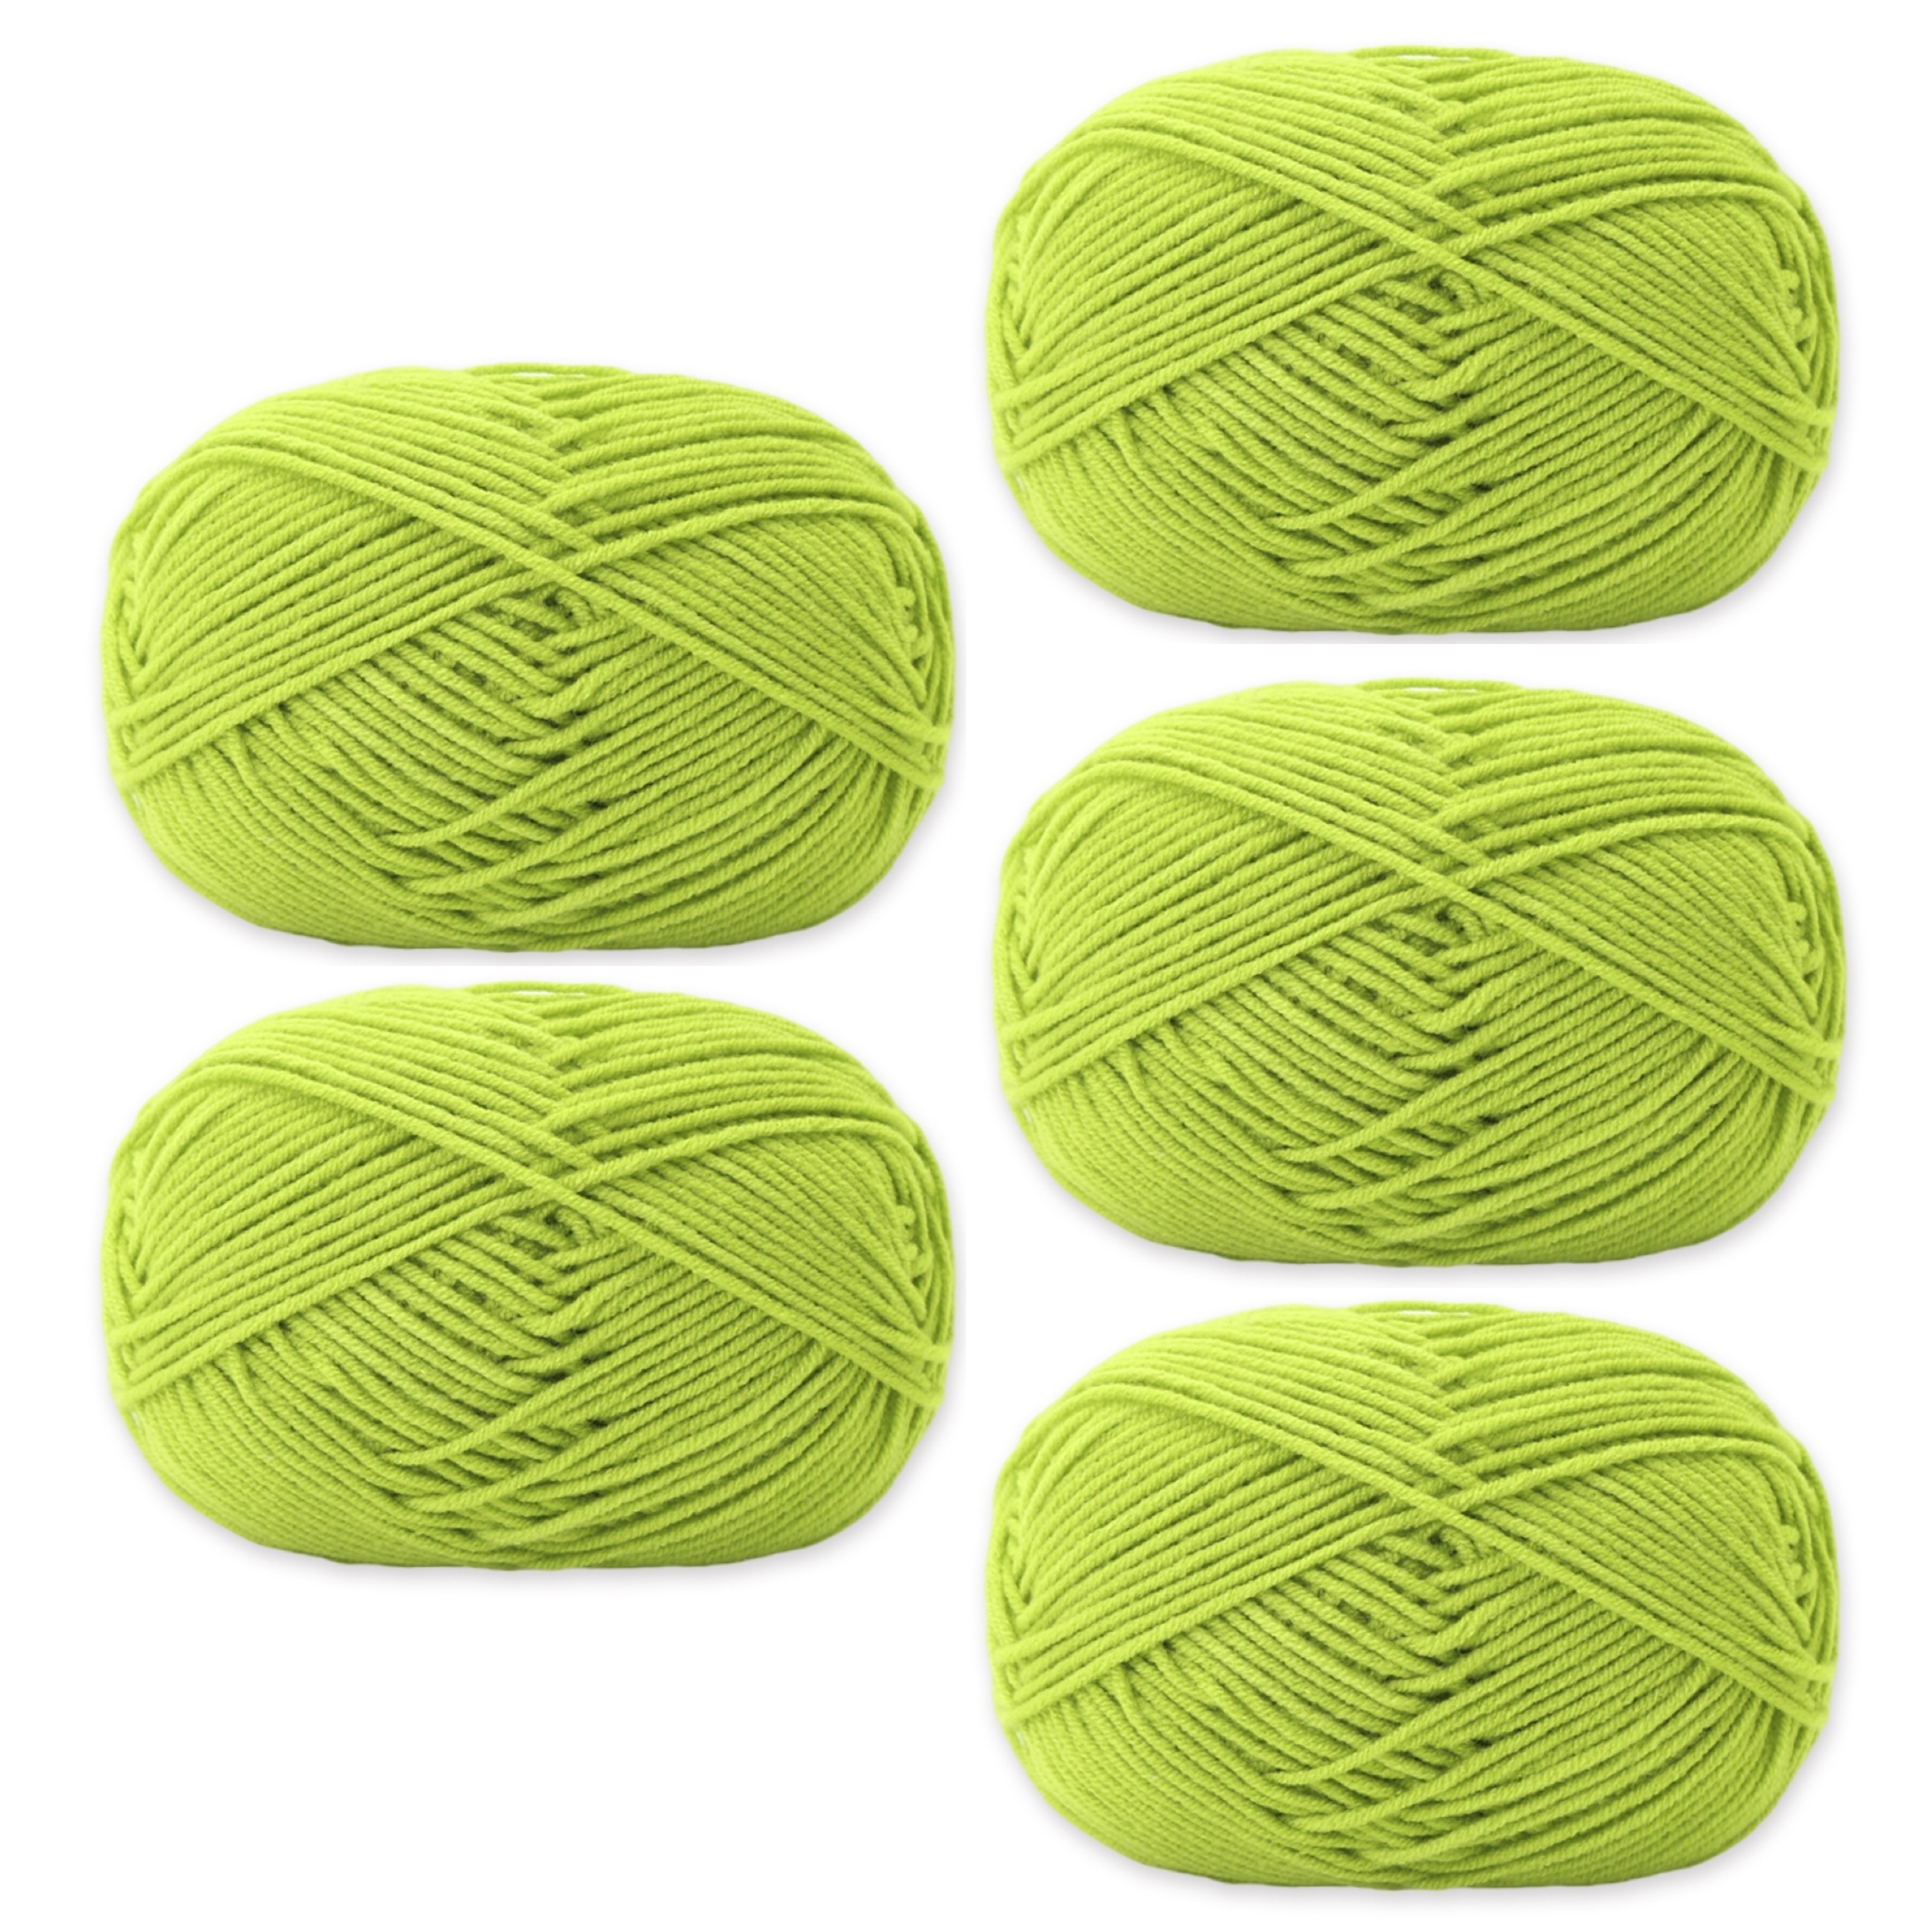 4 PCS 200g Acrylic Yarn for Crocheting,Soft Crochet Yarn for Knitting and  Crafts,4 ply Warm Yarn for DIY Hats Scarves Shoes Dolls Small Ornaments